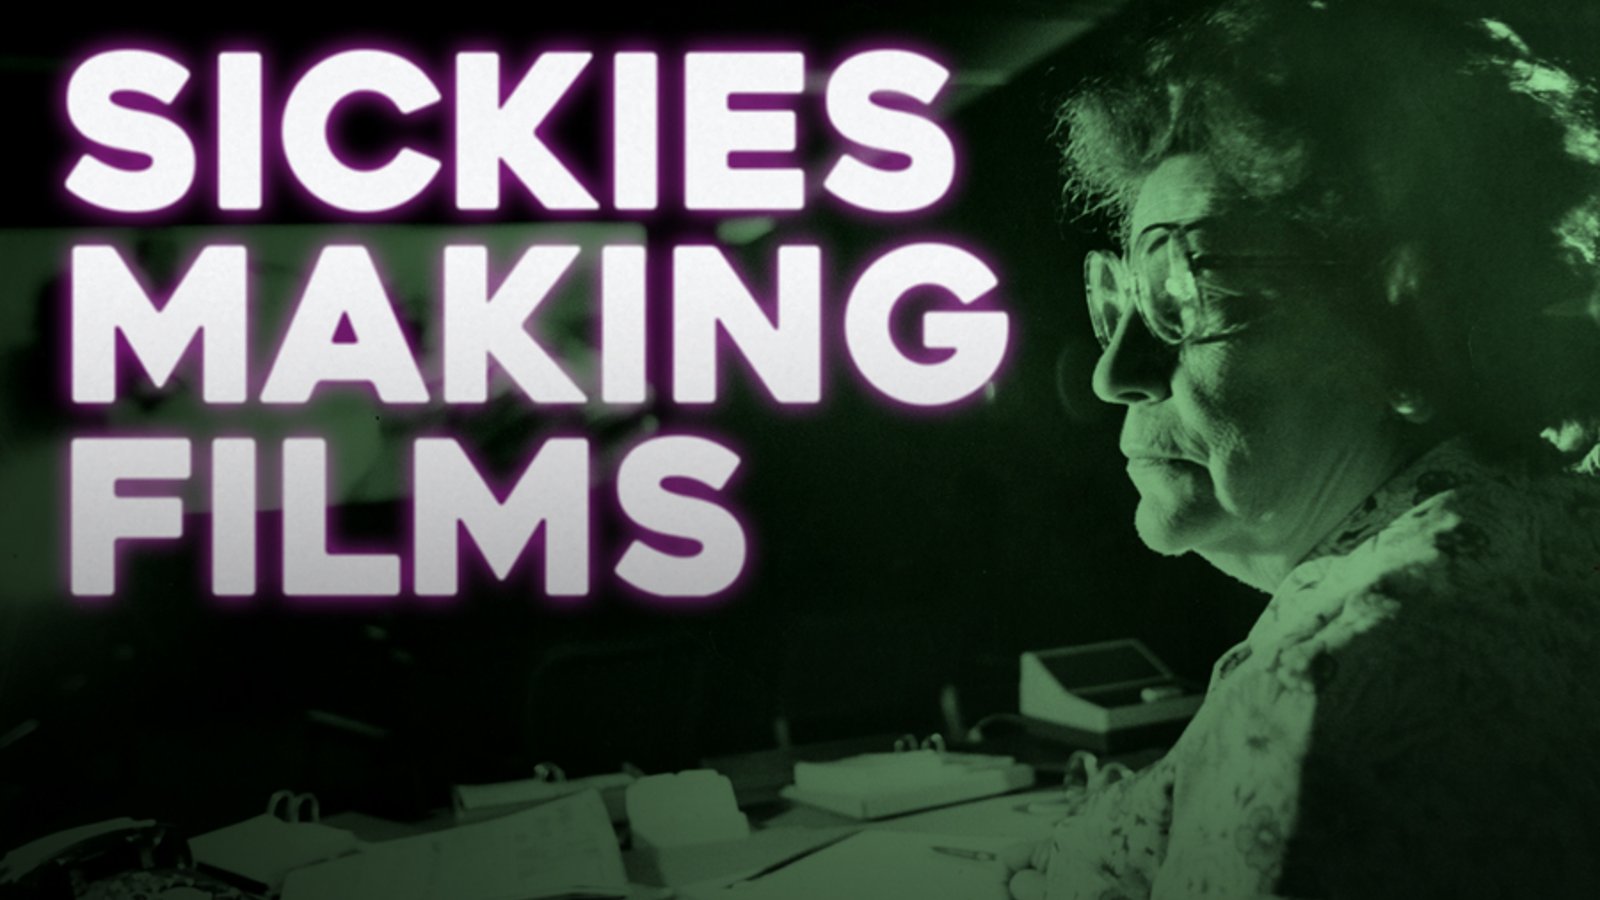 Sickies Making Films - A History of Censoring Film in America